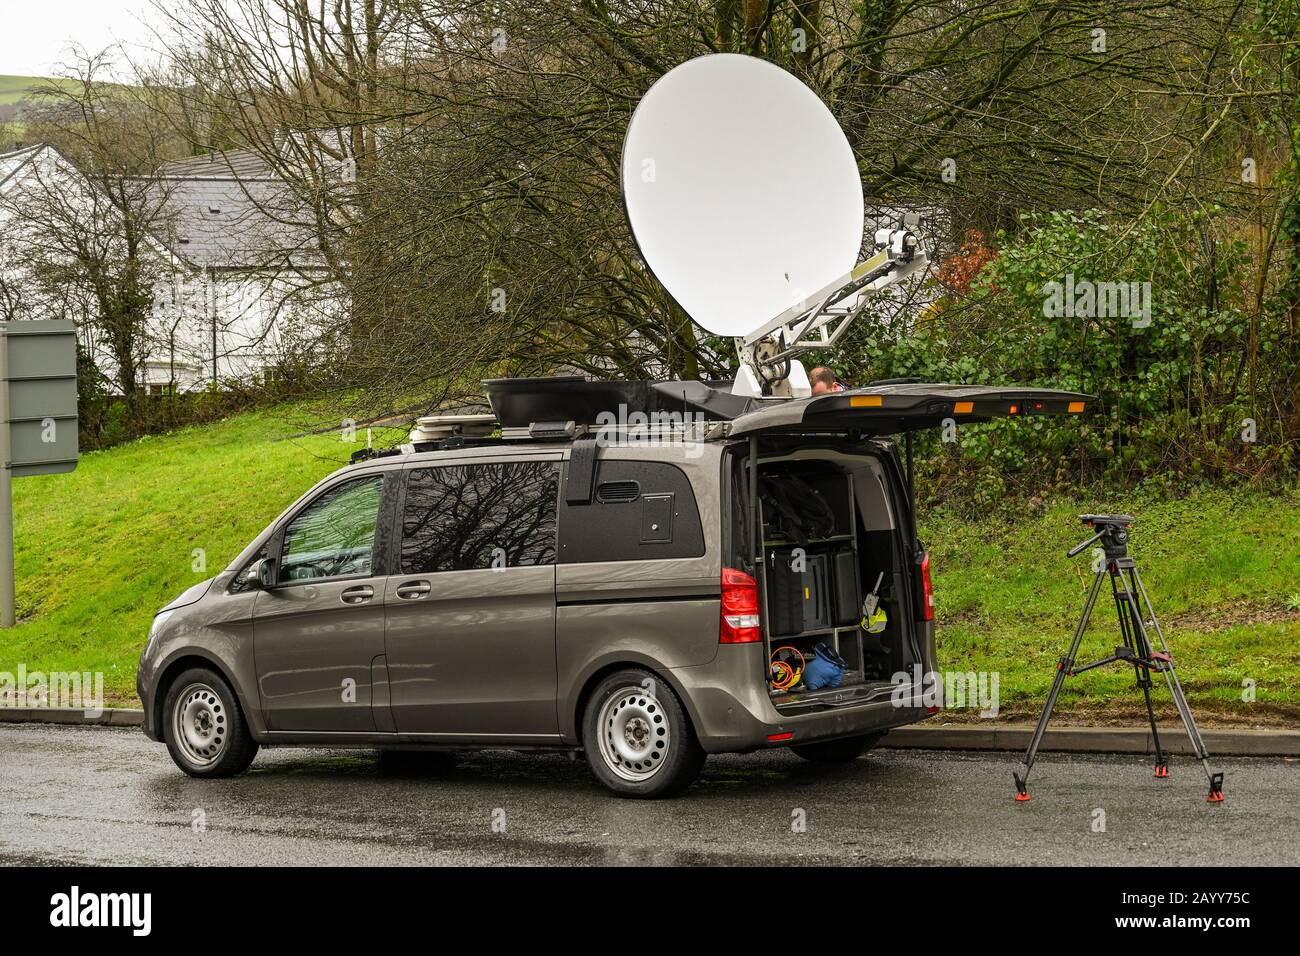 NANTGARW, NEAR CARDIFF, WALES - FEBRUARY 2020: Mobile TV broadcast unit with folding satellite dish on the roof at a flooding incident in Nantgarw nea Stock Photo